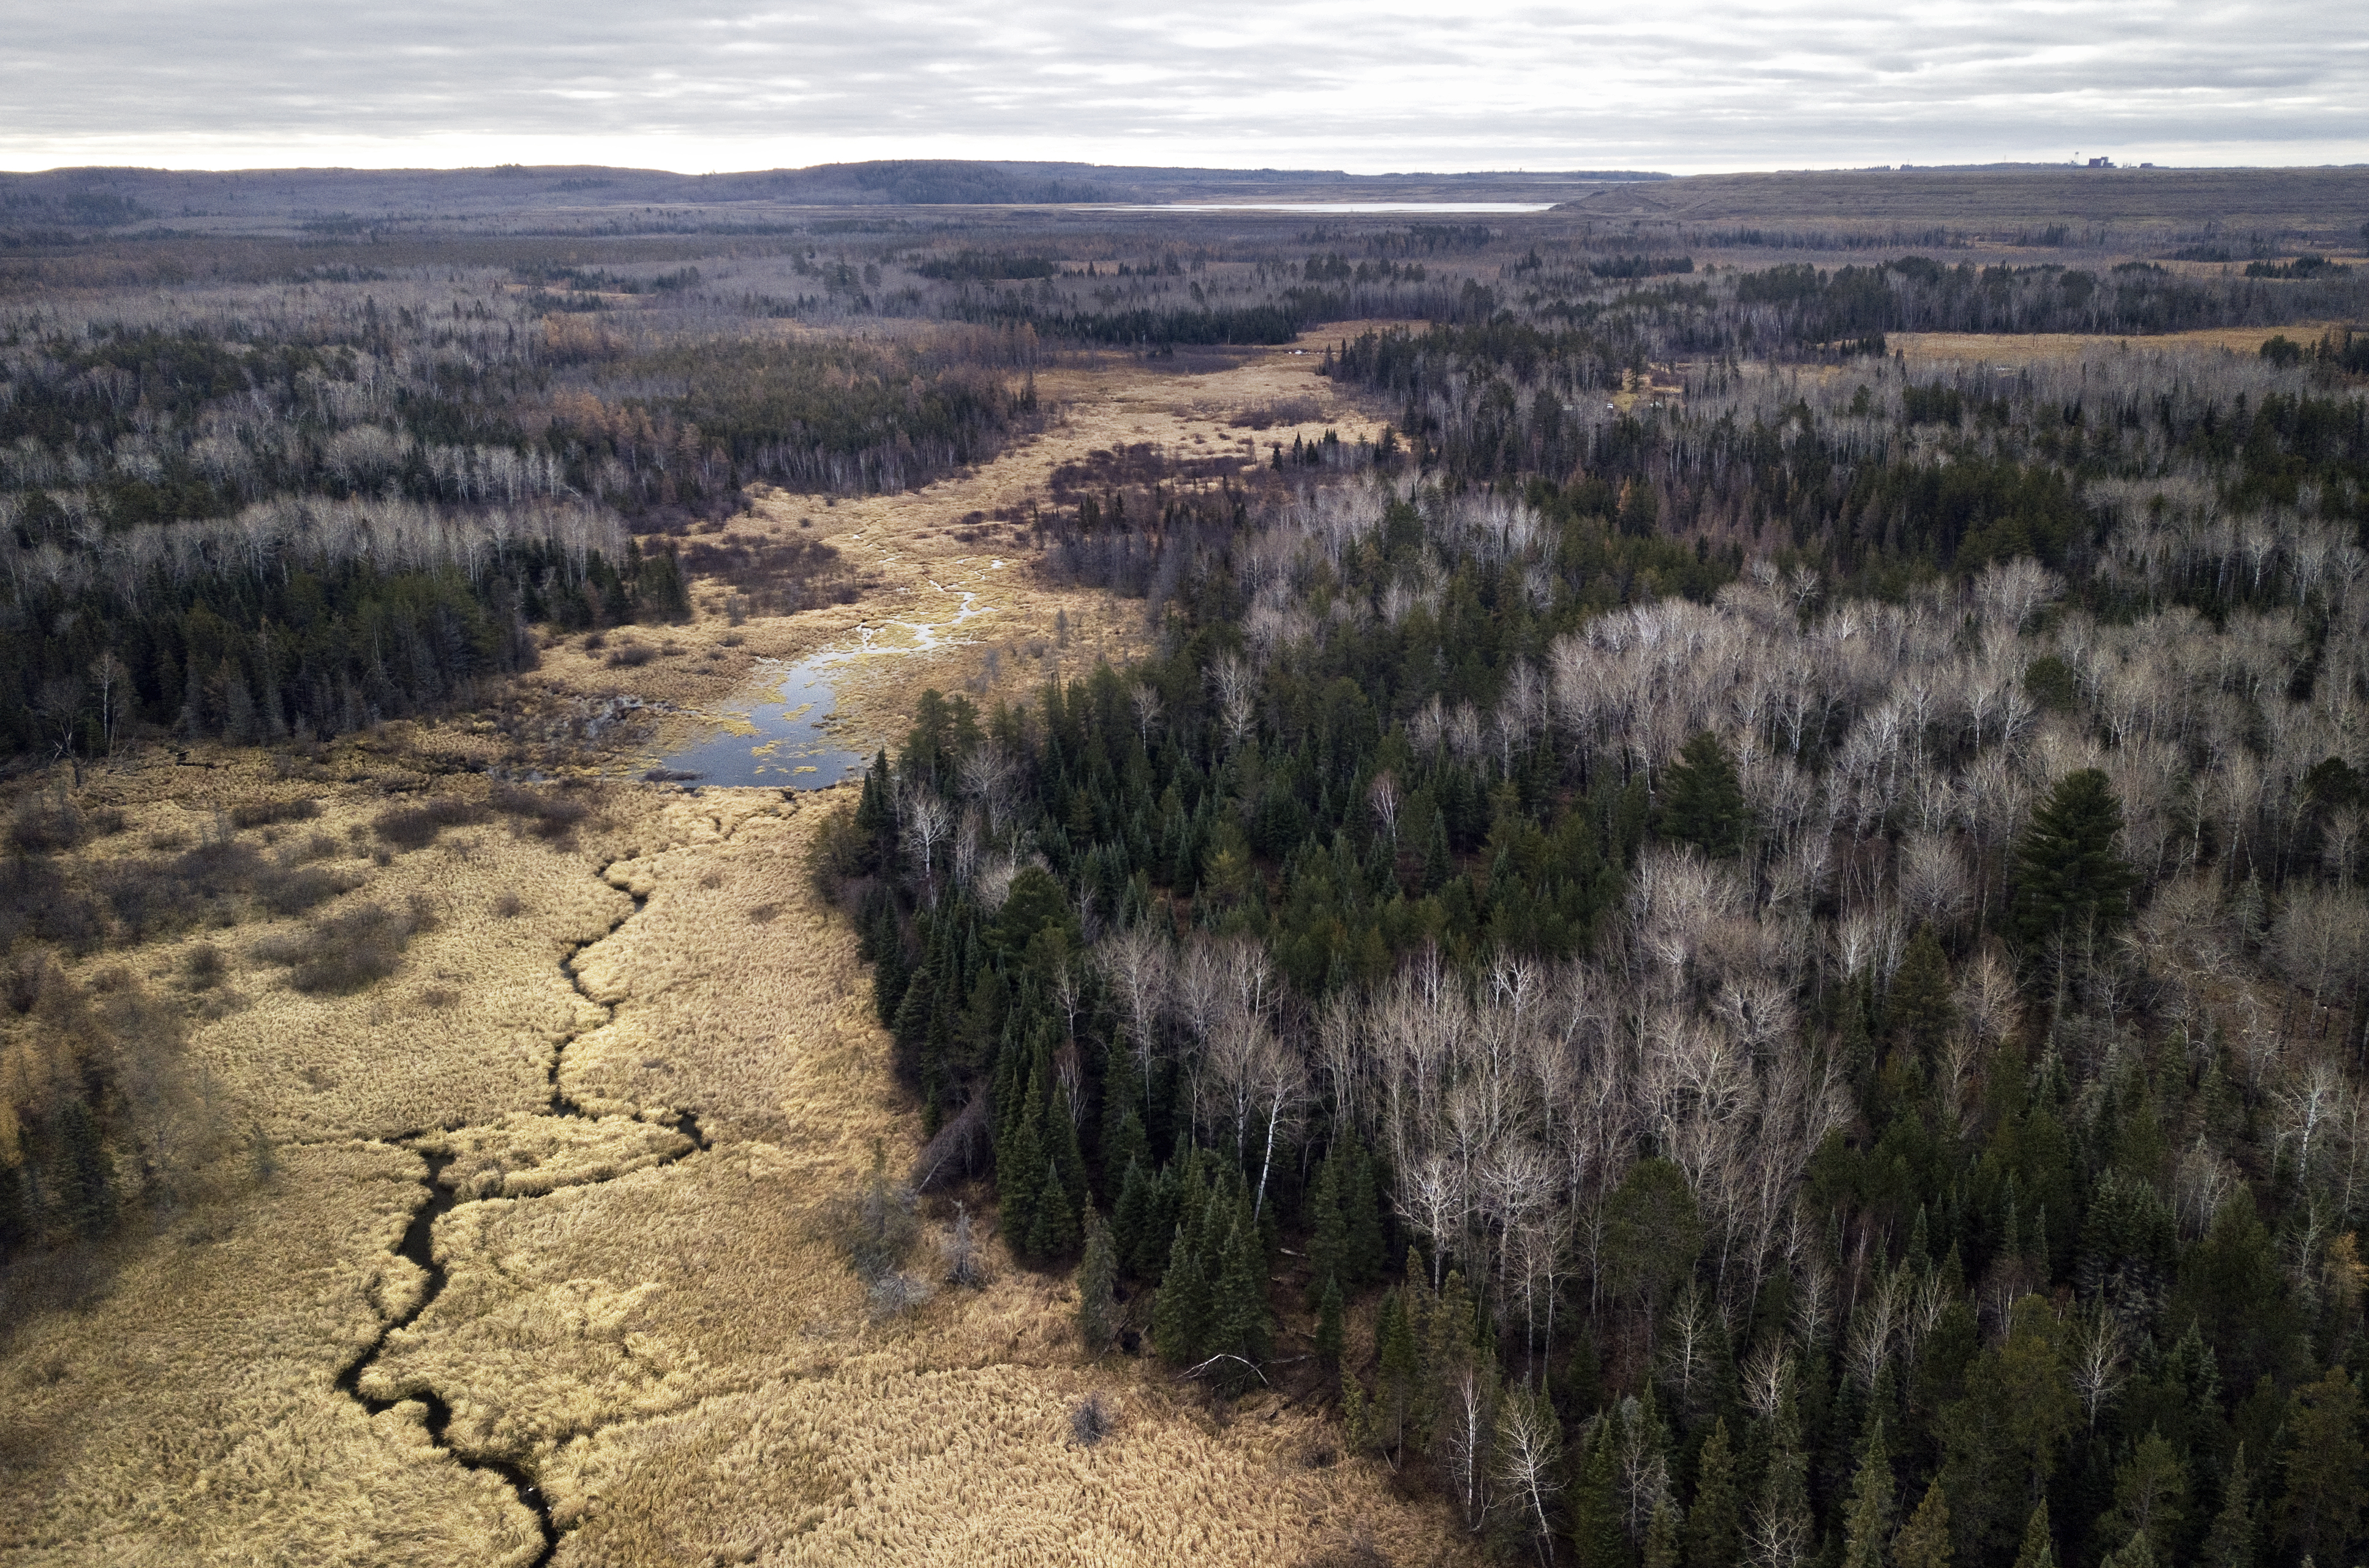 Aerial image of Trimble Creek, near the site for PolyMet's proposed mine. Image courtesy of Rob Levine.